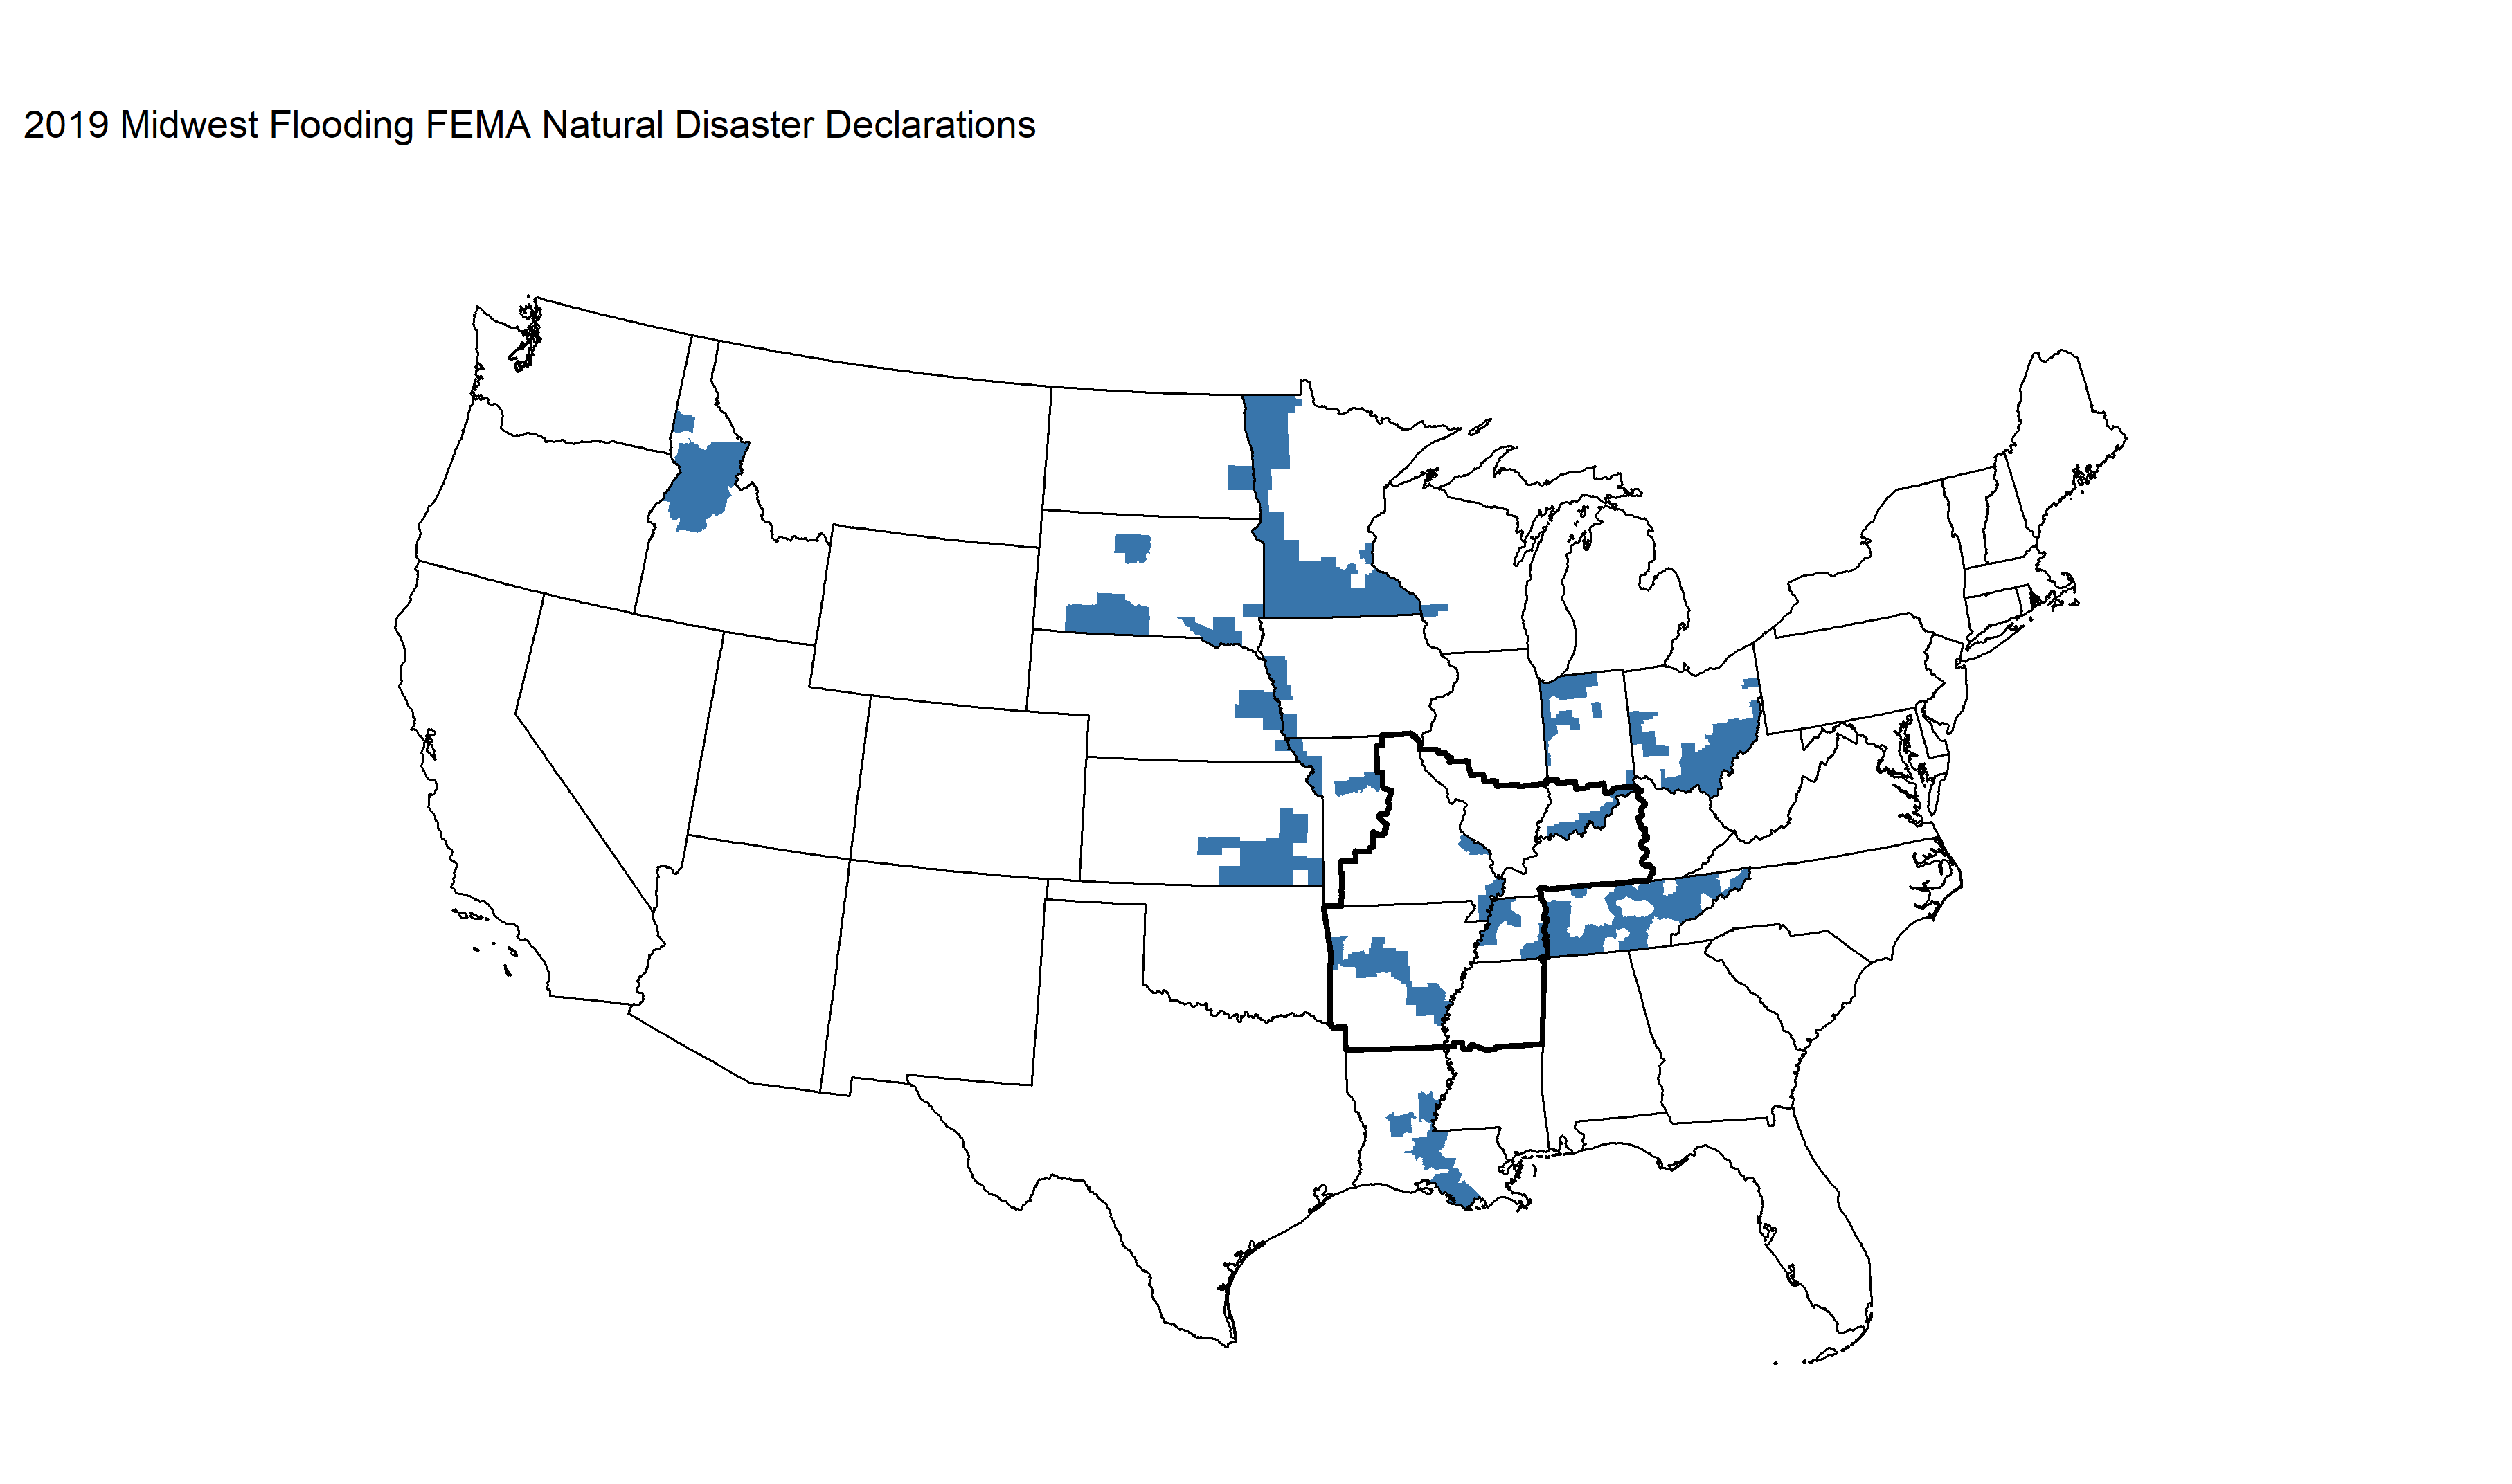 Map of 2019 Midwest FLooding showing FEMA Natural Disaster Declarations